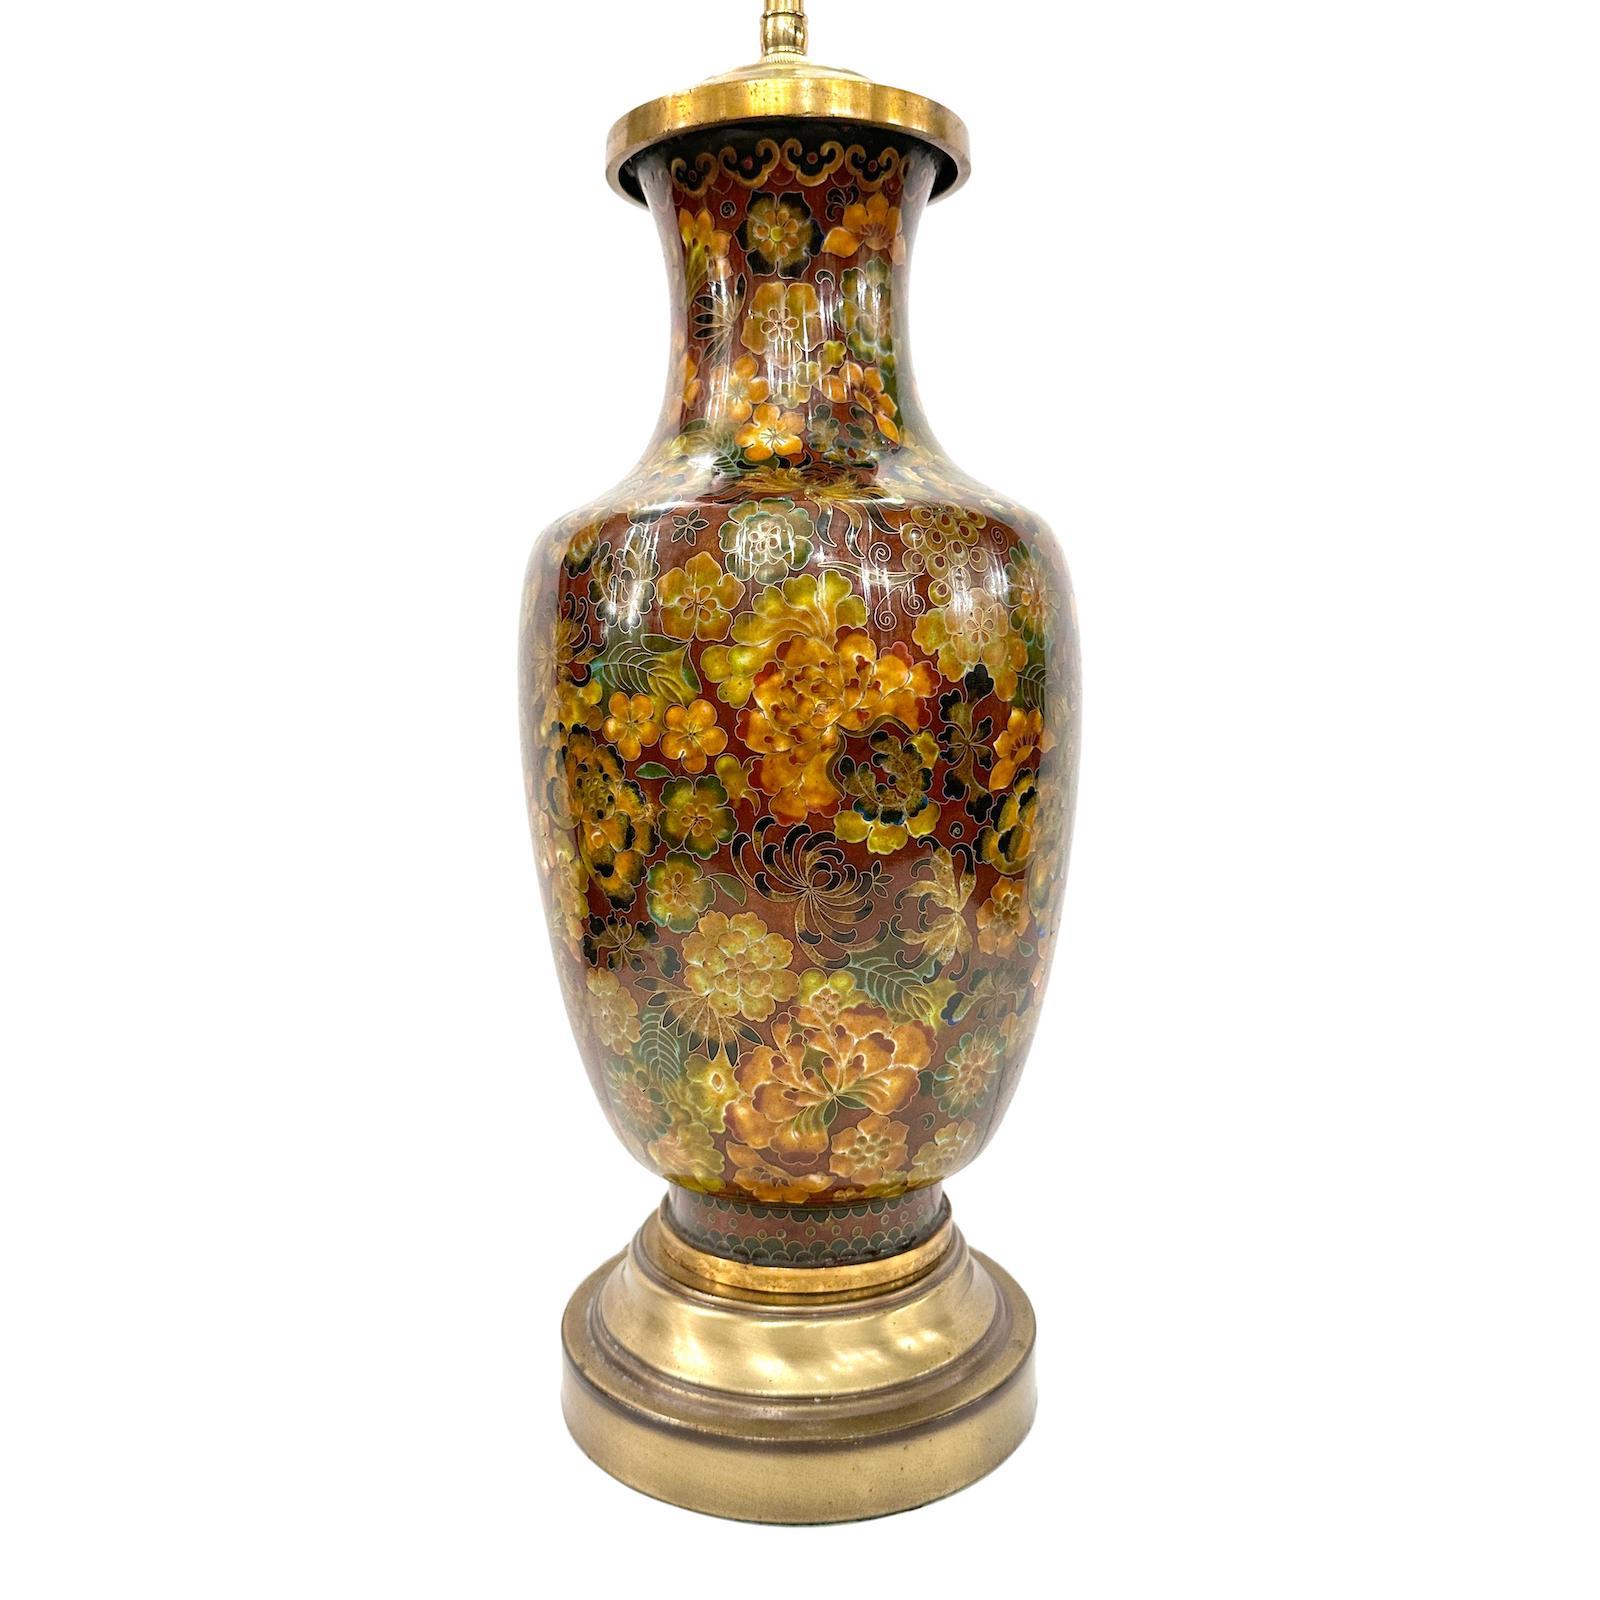 A circa 1940s Chinese enamelled table lamp with floral motif.

Measurements:
Height of body: 18